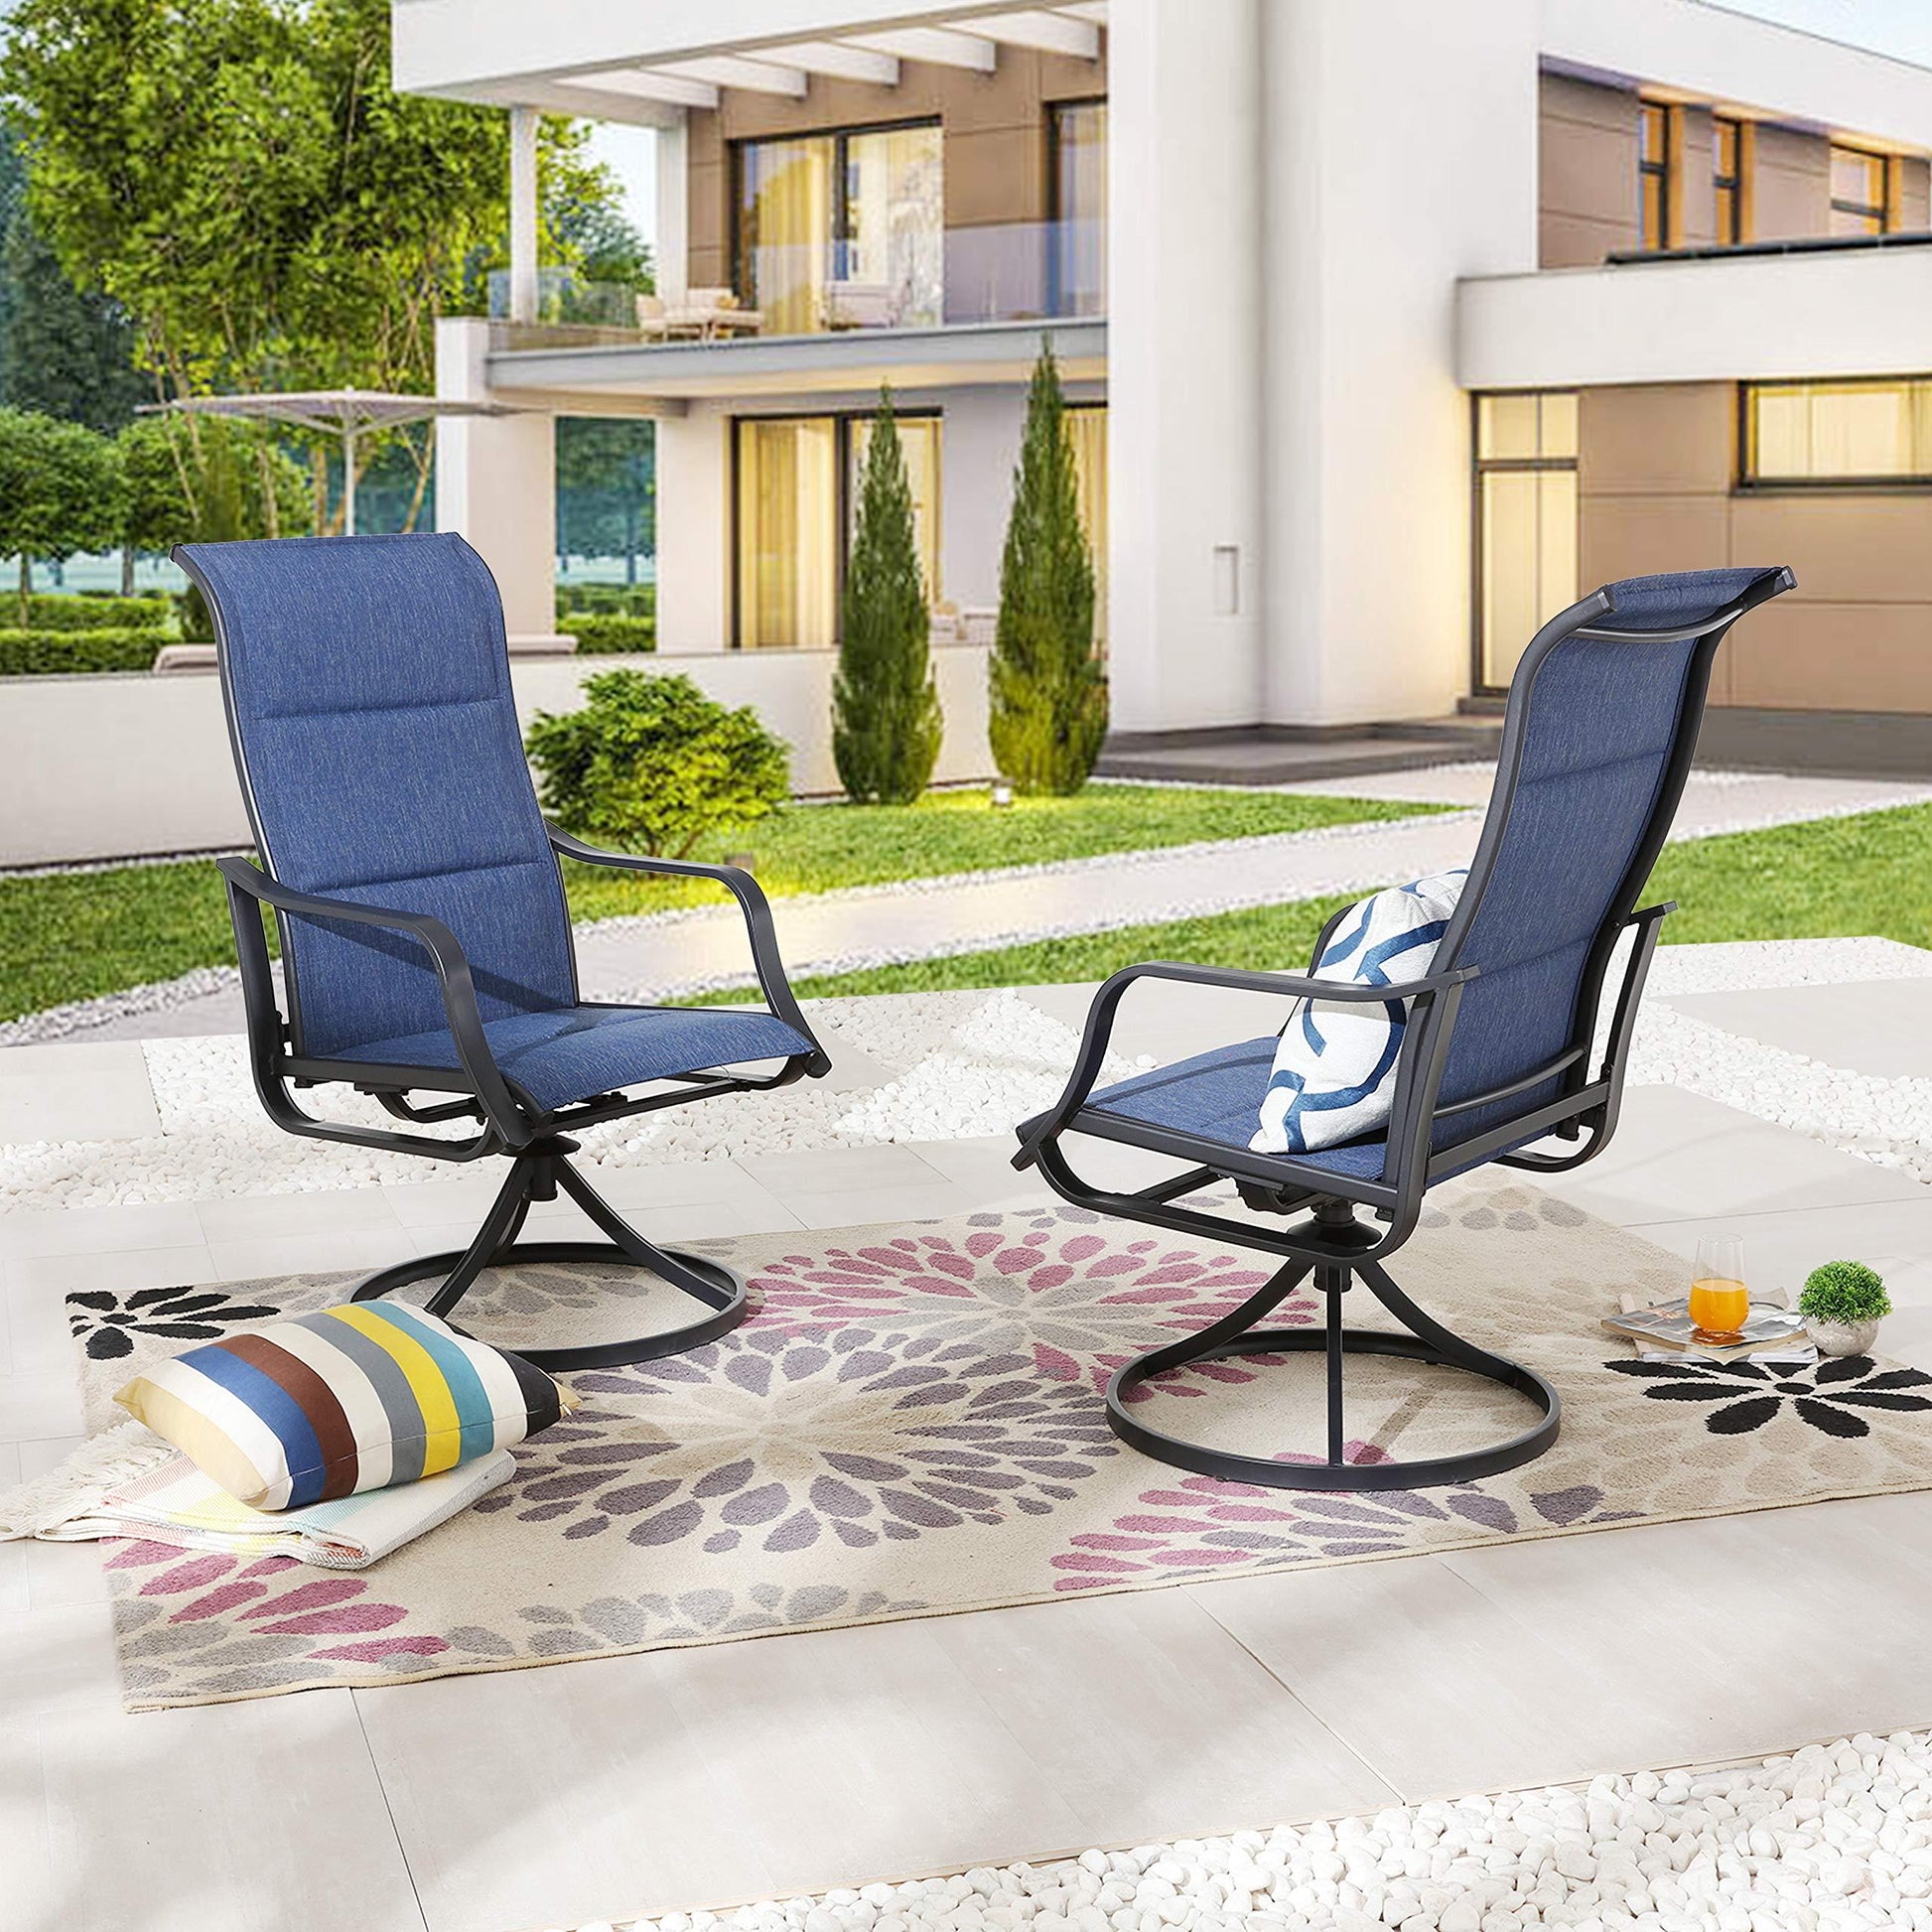 LOKATSE HOME Outdoor Patio Swivel Dining Chair Sling Set with Textilene Fabric All Weather Frame (Set of 2), Blue-1 - CookCave